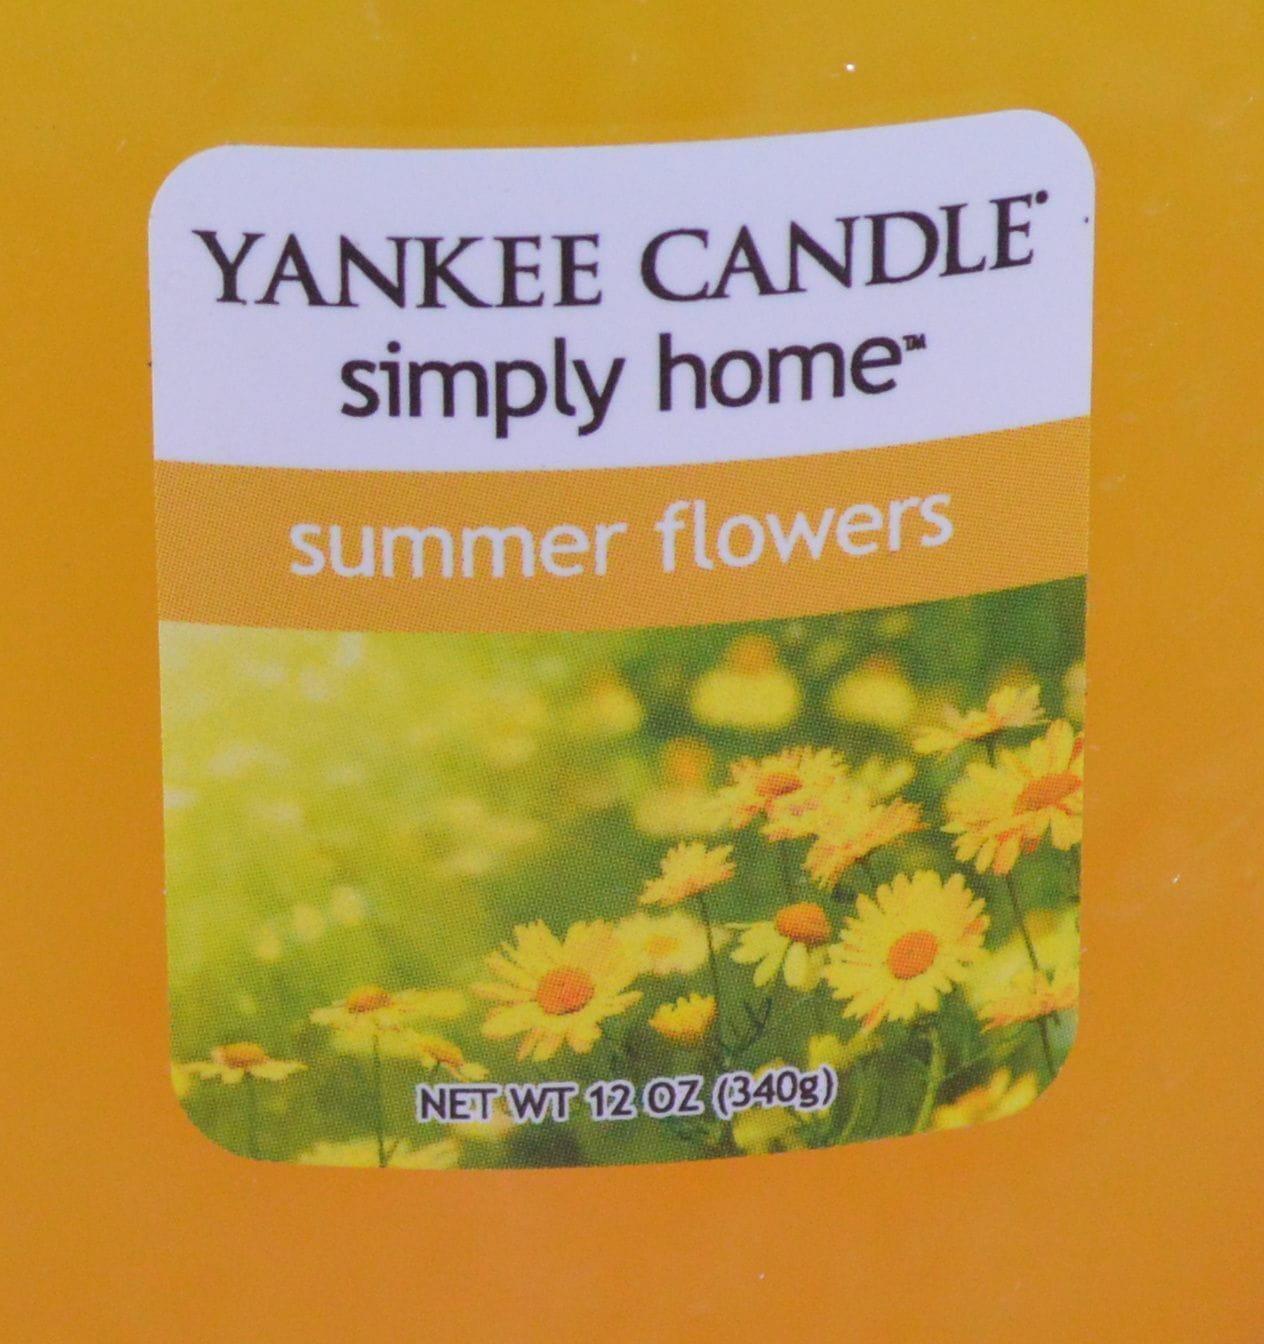 NEW FIVE INCH HIGH MEDIUM SIZE YANKEE CANDLE JAR SUMMER FLOWERS - TMD167207